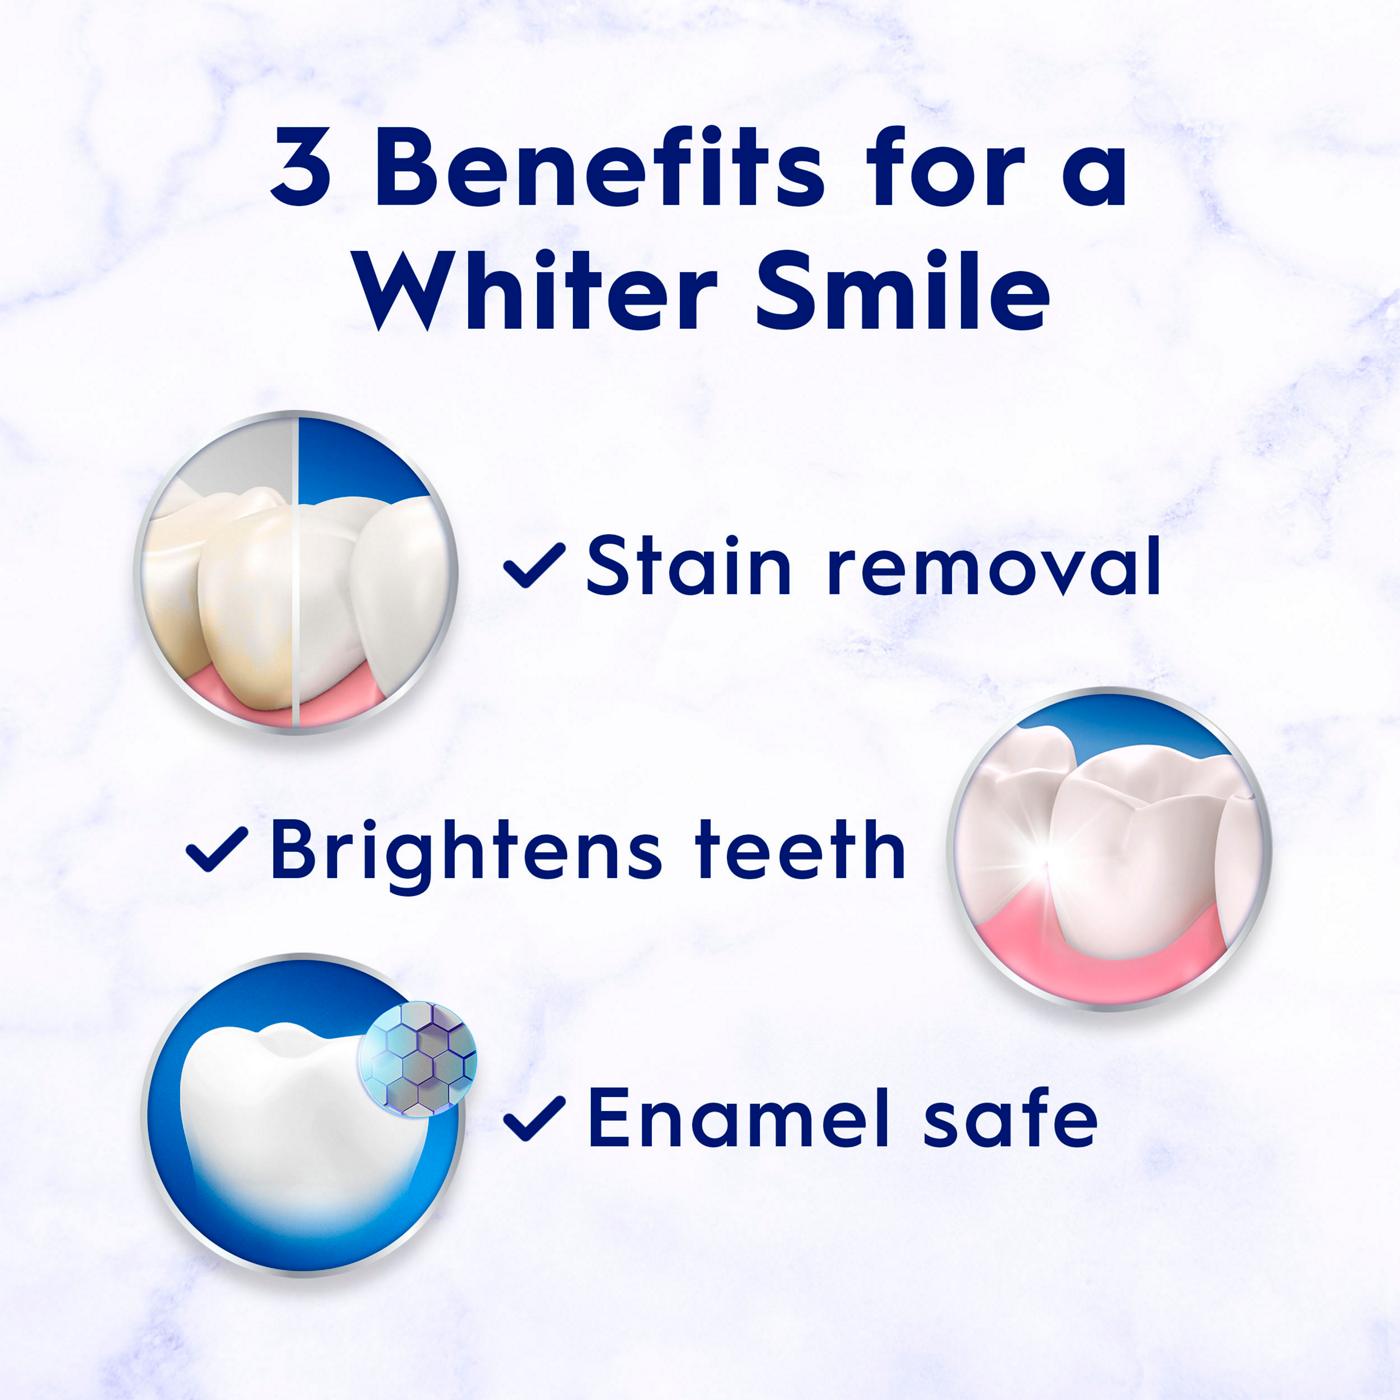 Crest 3D White Whitening Toothpaste - Deep Clean; image 7 of 7